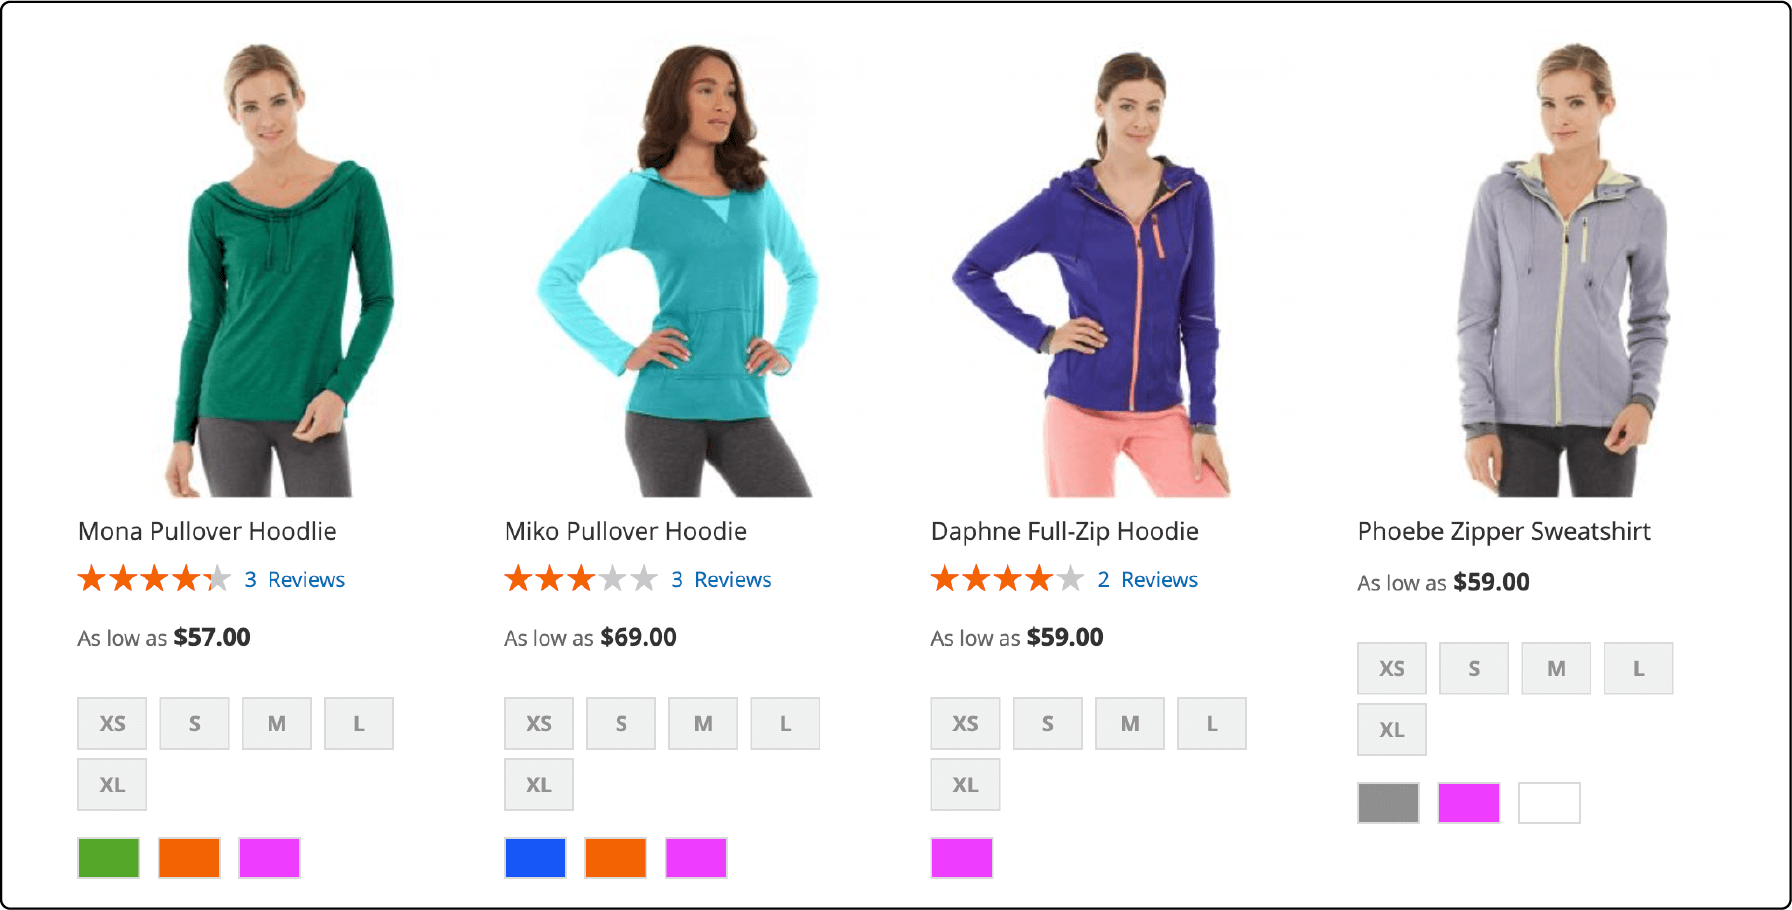 Magento 2 Small Image in Product Listings